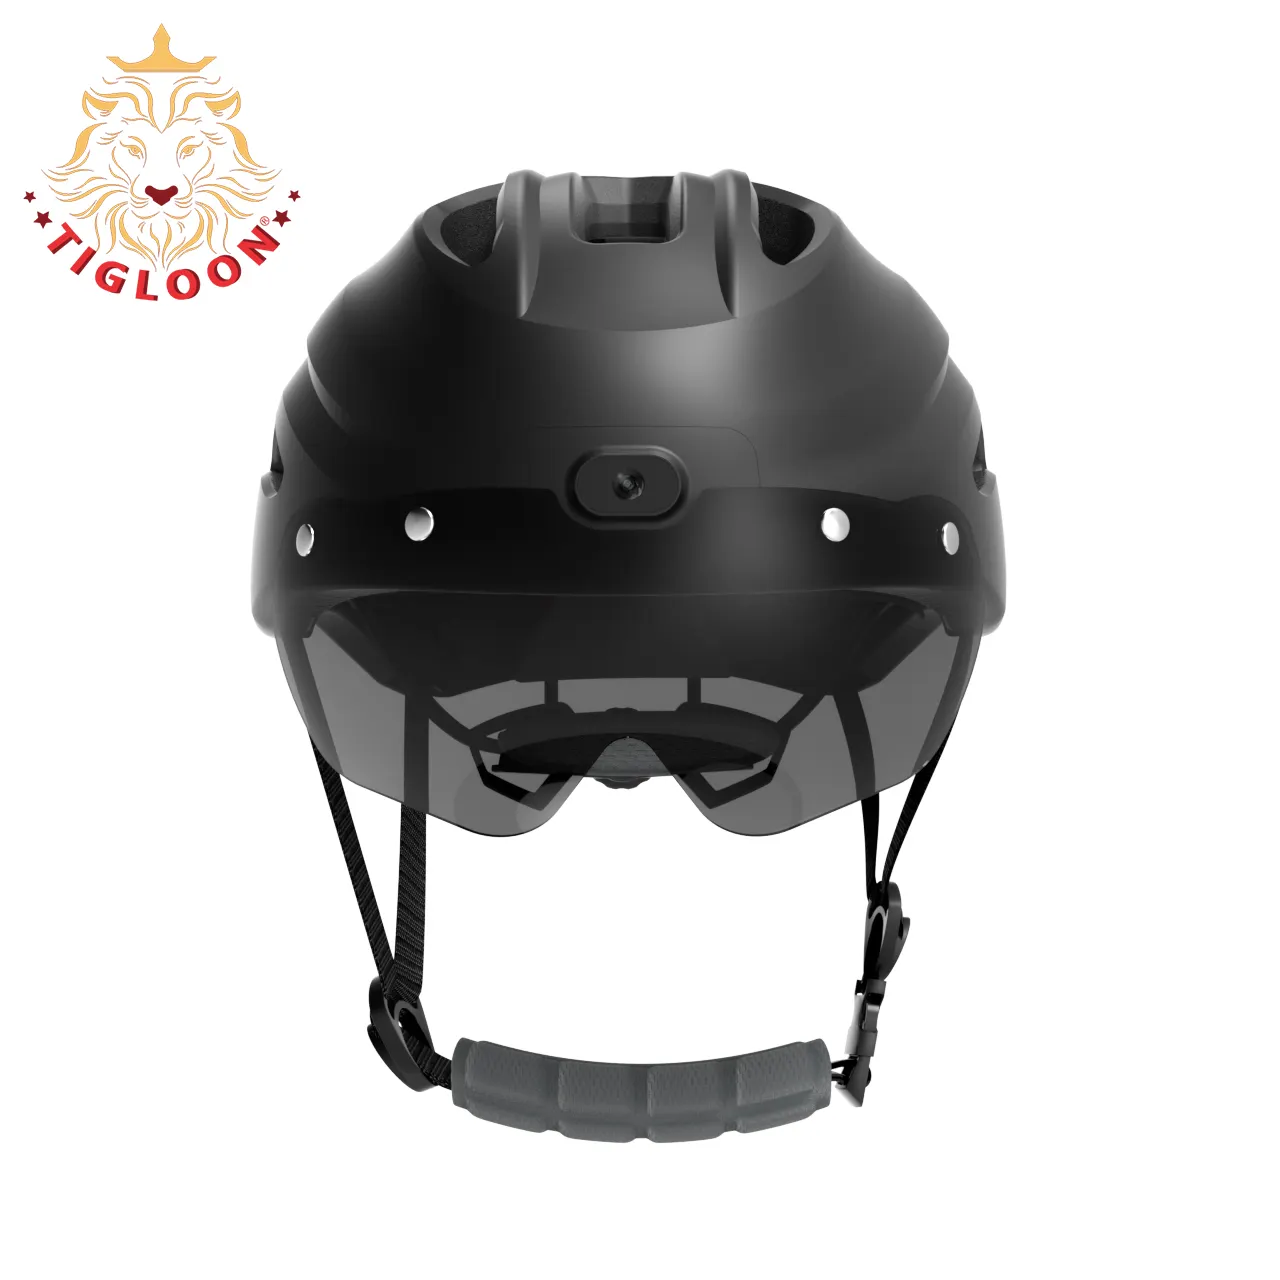 China Motorcycle Helmet Camera Safety Helmet Mobility Scooters and Wheelchairs Mining Helmet Smart Led WarningFlash Riding